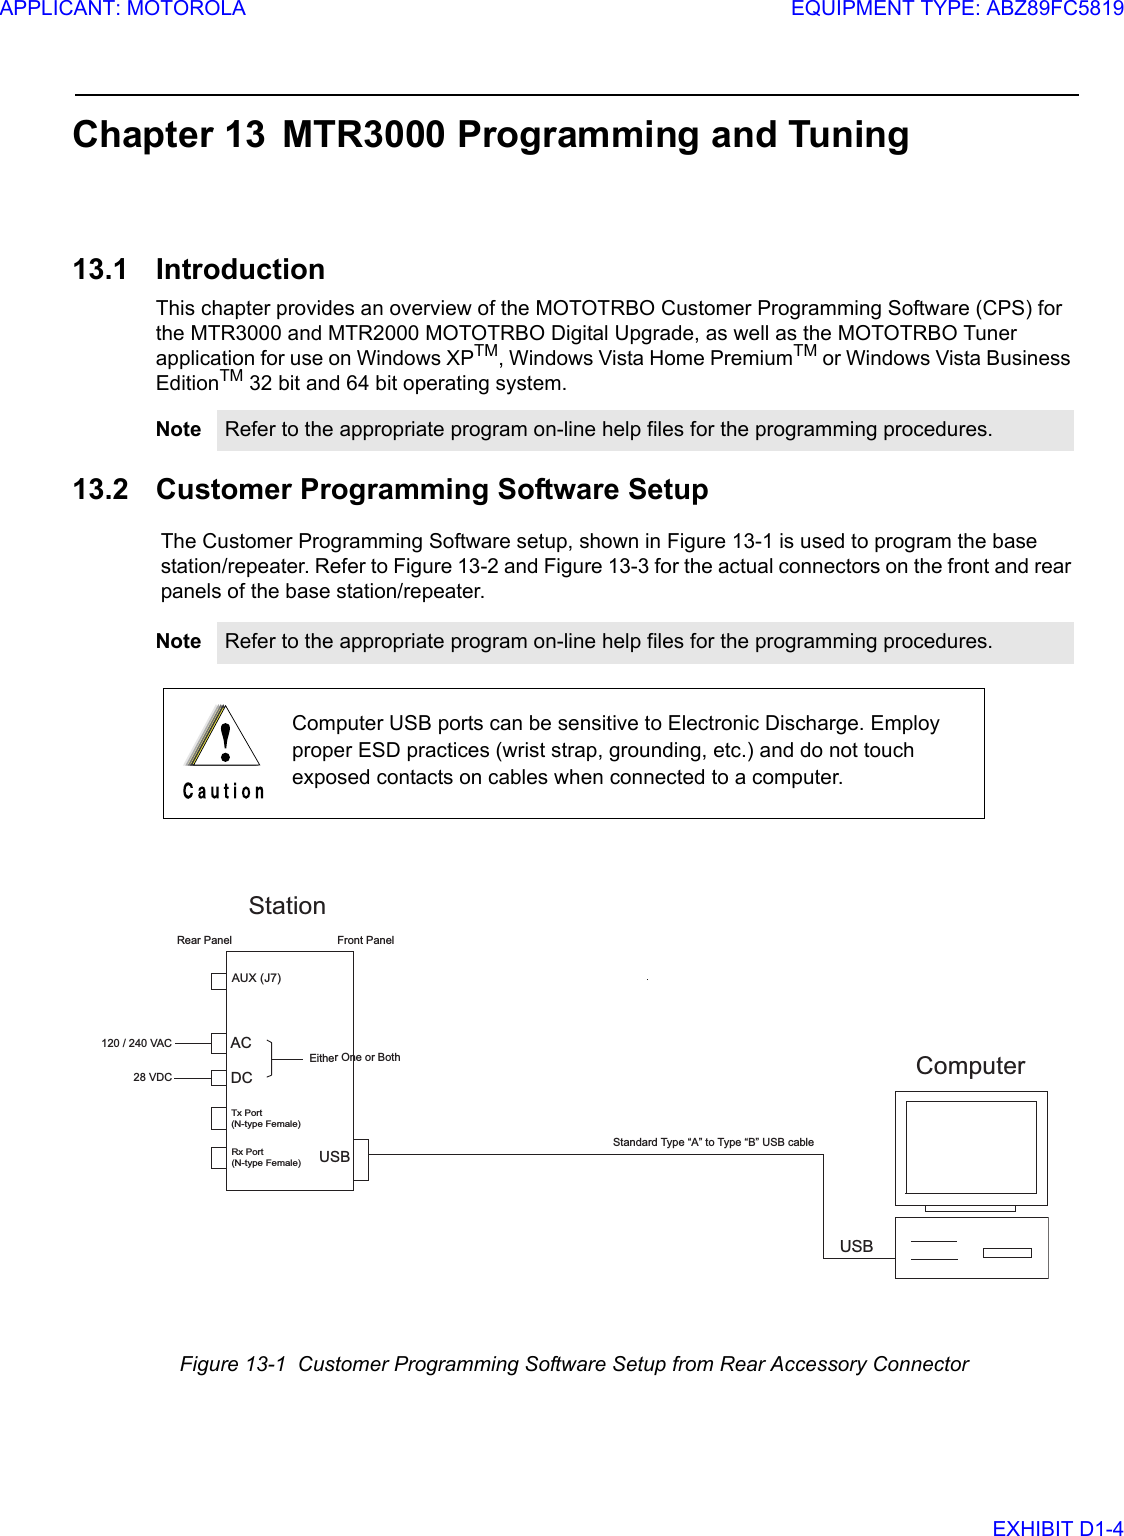 Chapter 13 MTR3000 Programming and Tuning13.1 IntroductionThis chapter provides an overview of the MOTOTRBO Customer Programming Software (CPS) for the MTR3000 and MTR2000 MOTOTRBO Digital Upgrade, as well as the MOTOTRBO Tuner application for use on Windows XPTM, Windows Vista Home PremiumTM or Windows Vista Business EditionTM 32 bit and 64 bit operating system. 13.2 Customer Programming Software SetupThe Customer Programming Software setup, shown in Figure 13-1 is used to program the base station/repeater. Refer to Figure 13-2 and Figure 13-3 for the actual connectors on the front and rear panels of the base station/repeater.Note Refer to the appropriate program on-line help files for the programming procedures.Note Refer to the appropriate program on-line help files for the programming procedures.Computer USB ports can be sensitive to Electronic Discharge. Employ proper ESD practices (wrist strap, grounding, etc.) and do not touch exposed contacts on cables when connected to a computer.Figure 13-1  Customer Programming Software Setup from Rear Accessory ConnectorFront PanelUSBACUSB120 / 240 VACStationTx Port(N-type Female)Rx Port(N-type Female)AUX (J7)DC28 VDCEither One or BothStandard Type “A” to Type “B” USB cable Rear PanelComputerAPPLICANT: MOTOROLAEQUIPMENT TYPE: ABZ89FC5819EXHIBIT D1-4